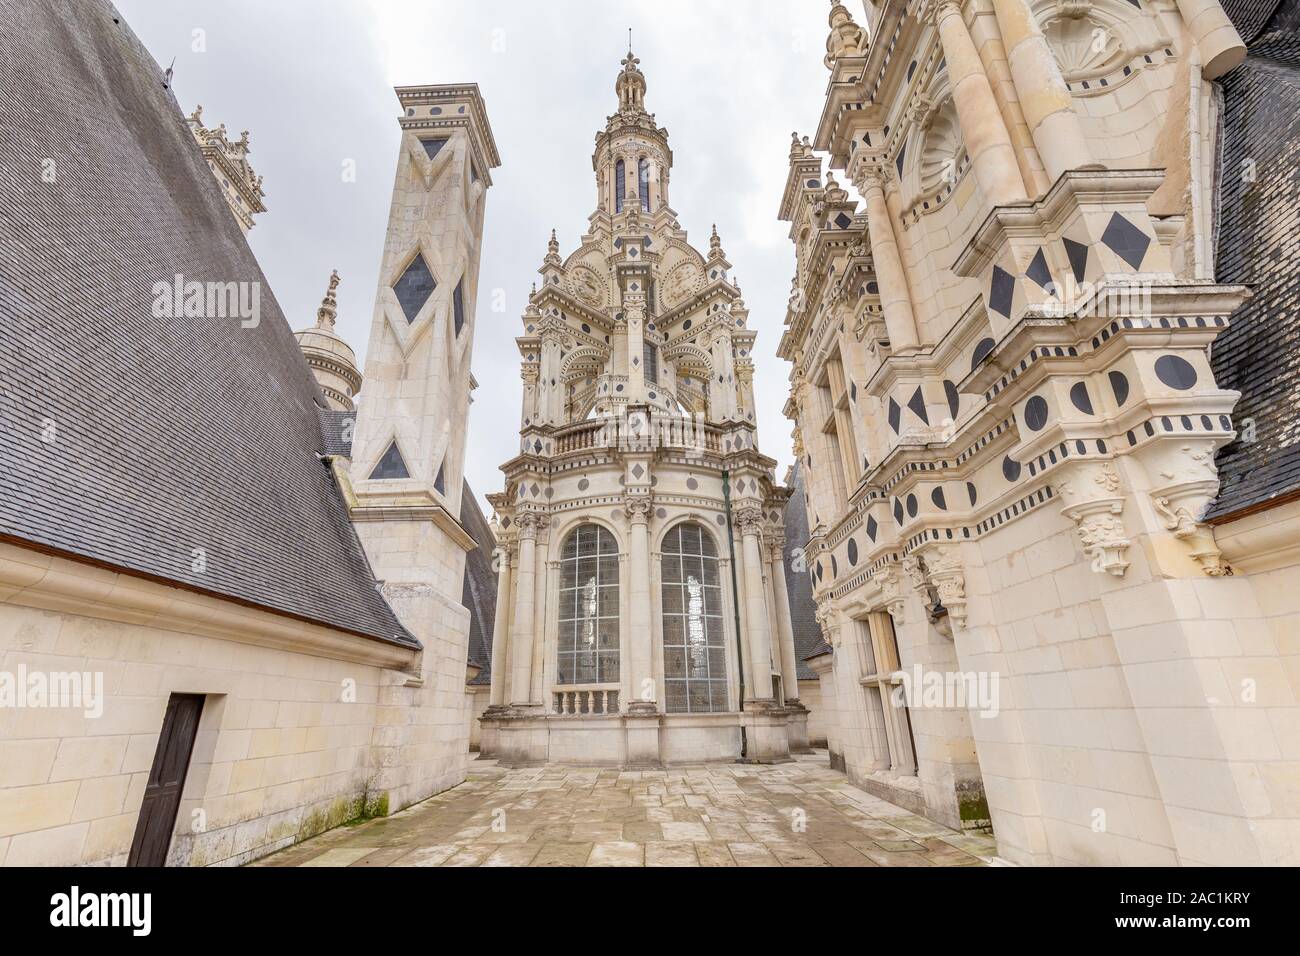 Chateau de Chambord, view of the terrace roof and elaborate towers and pinnacles , in Loire valley, Centre Valle de Loire in France Stock Photo